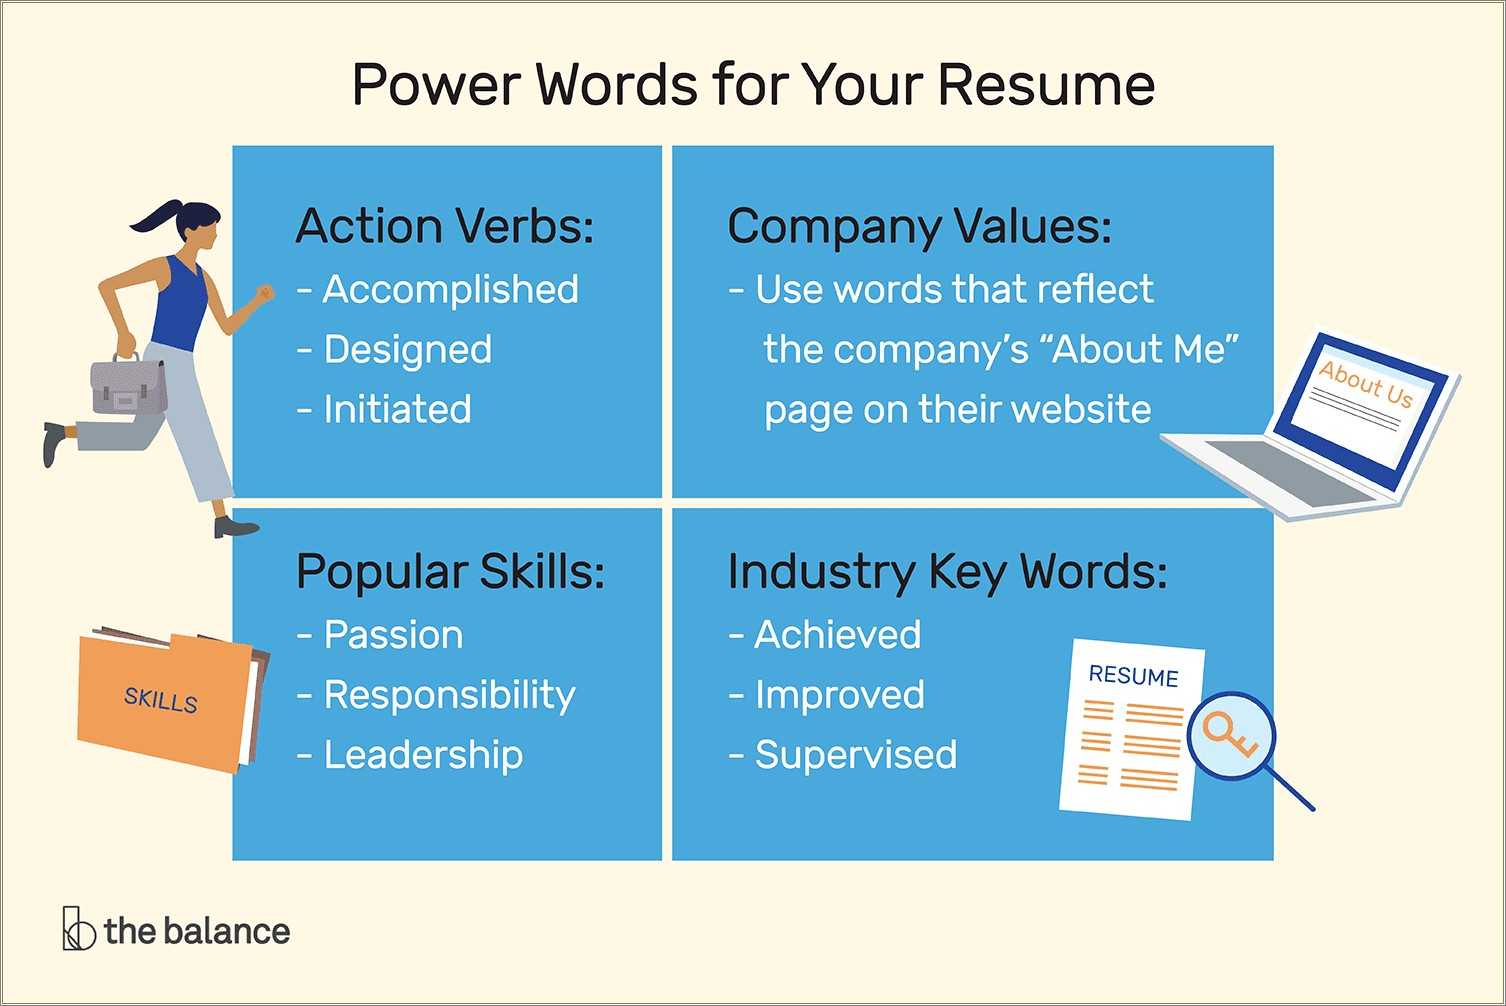 what's another word for skills on resume